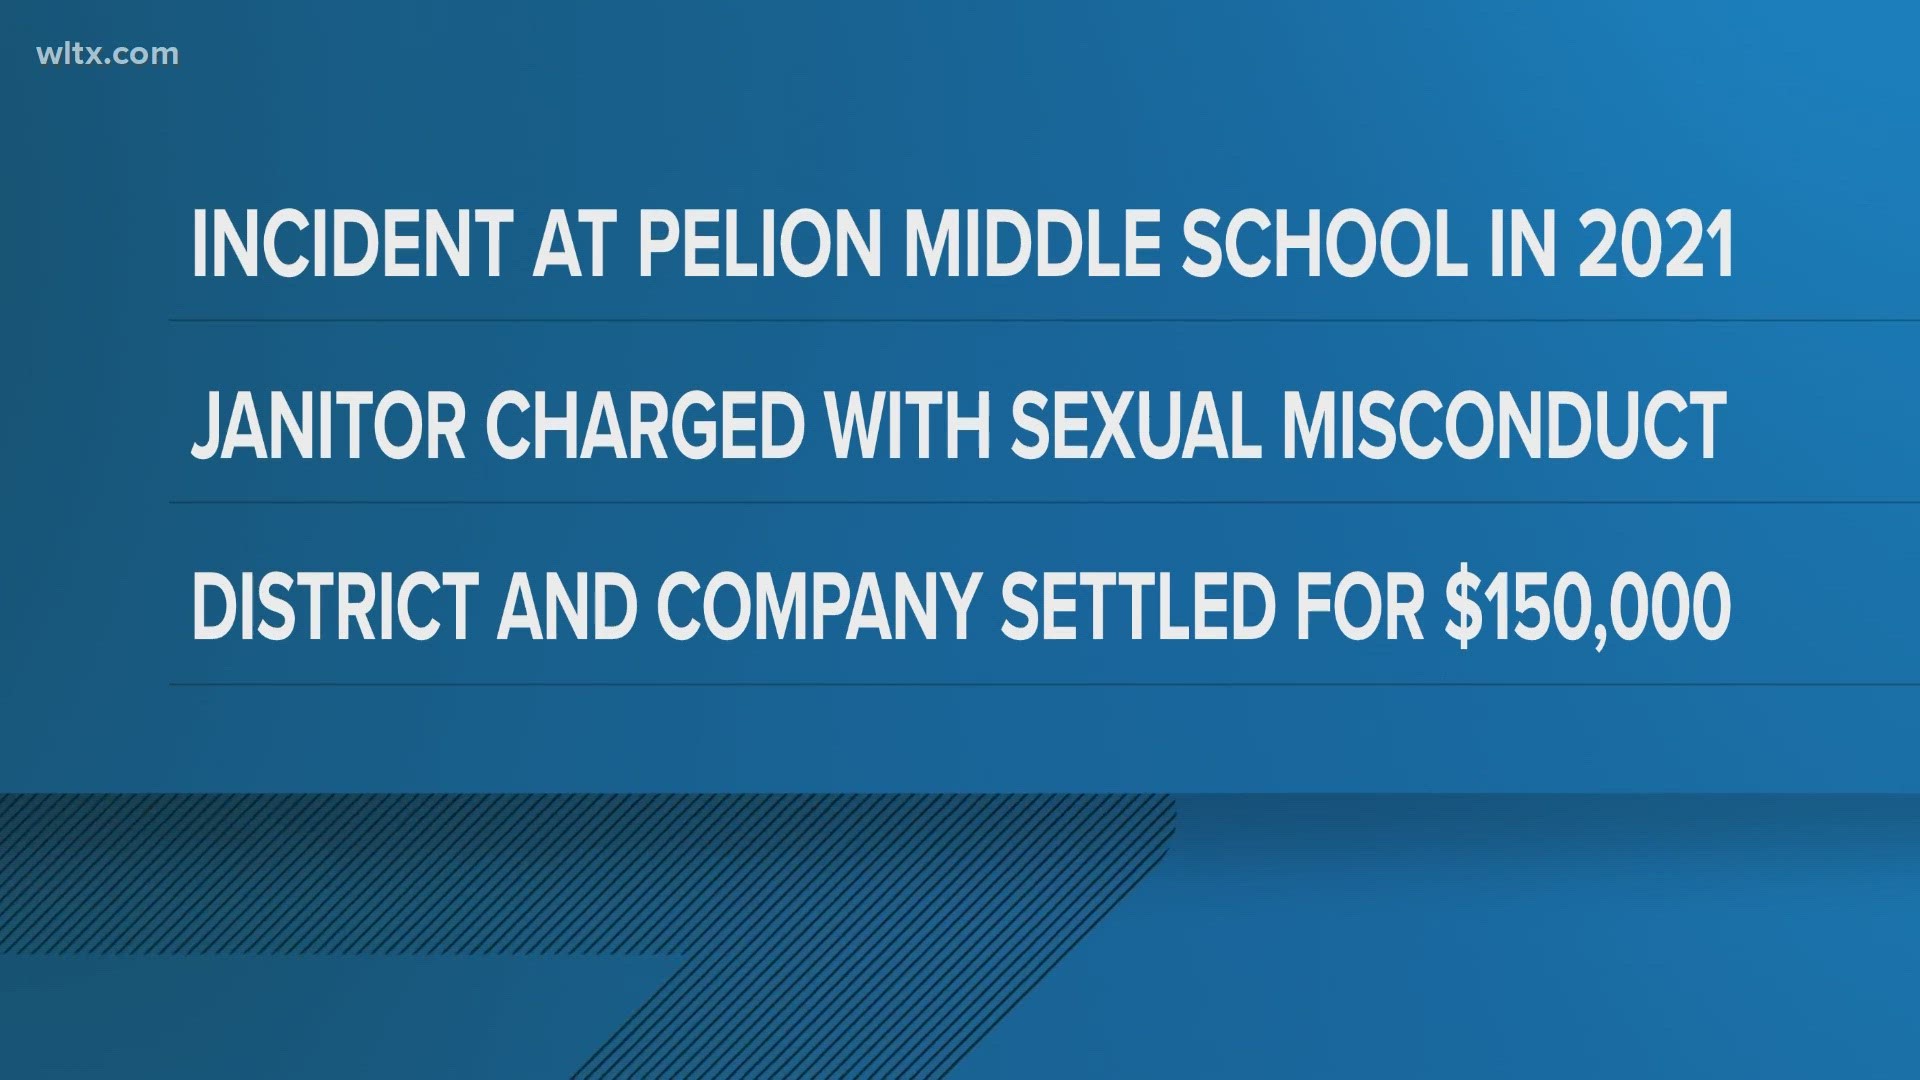 The lawsuit stemmed from a student who was sexually assaulted by a school janitor.